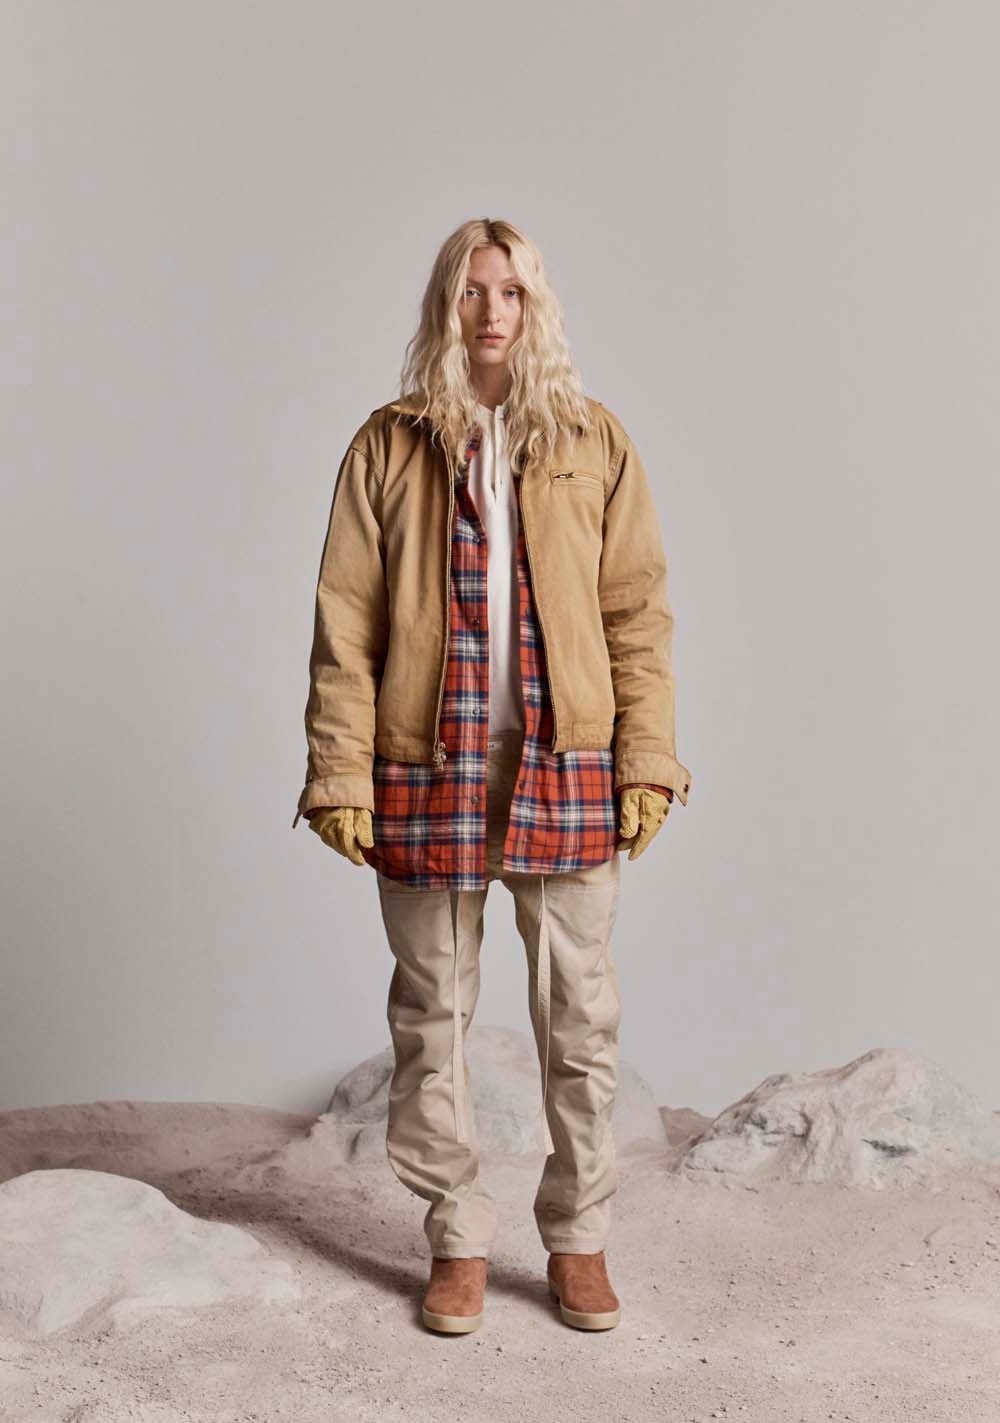 Fear of God fall winter 2018 lookbook collection nike collaboration drop september 5 6 2018 release date movie film video